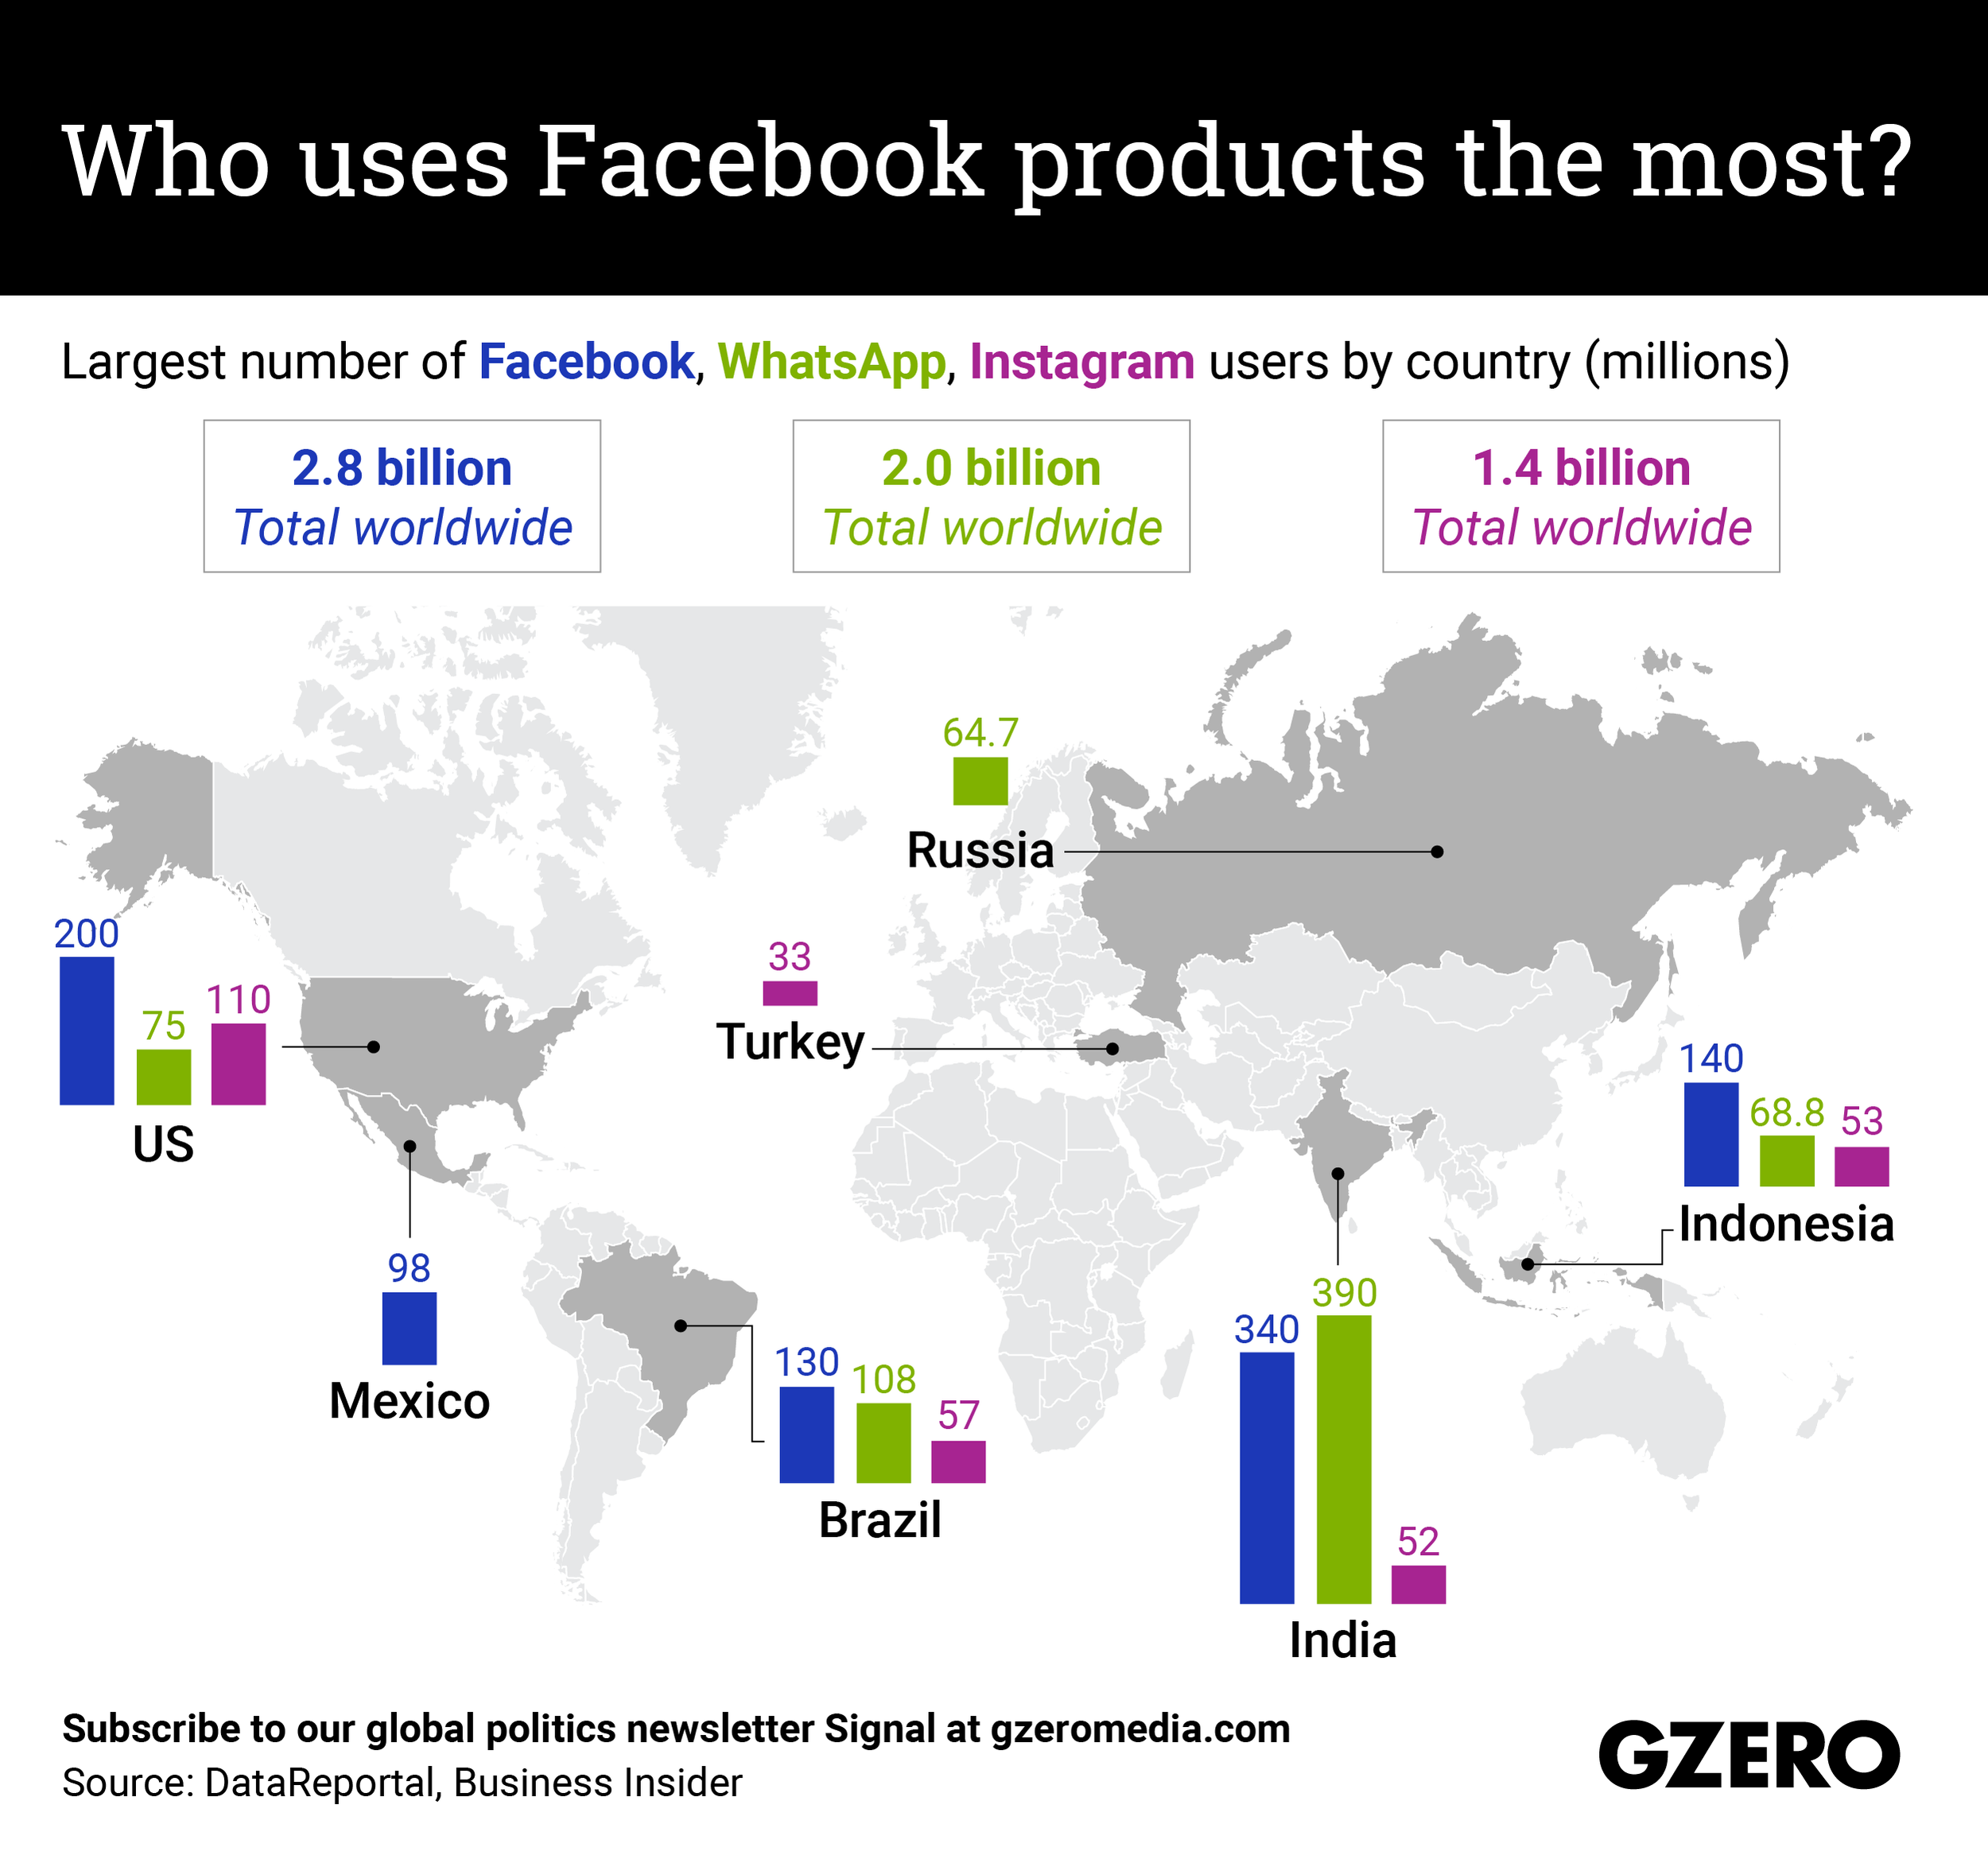 Largest number of Facebook, WhatsApp, Instagram users by country (millions)